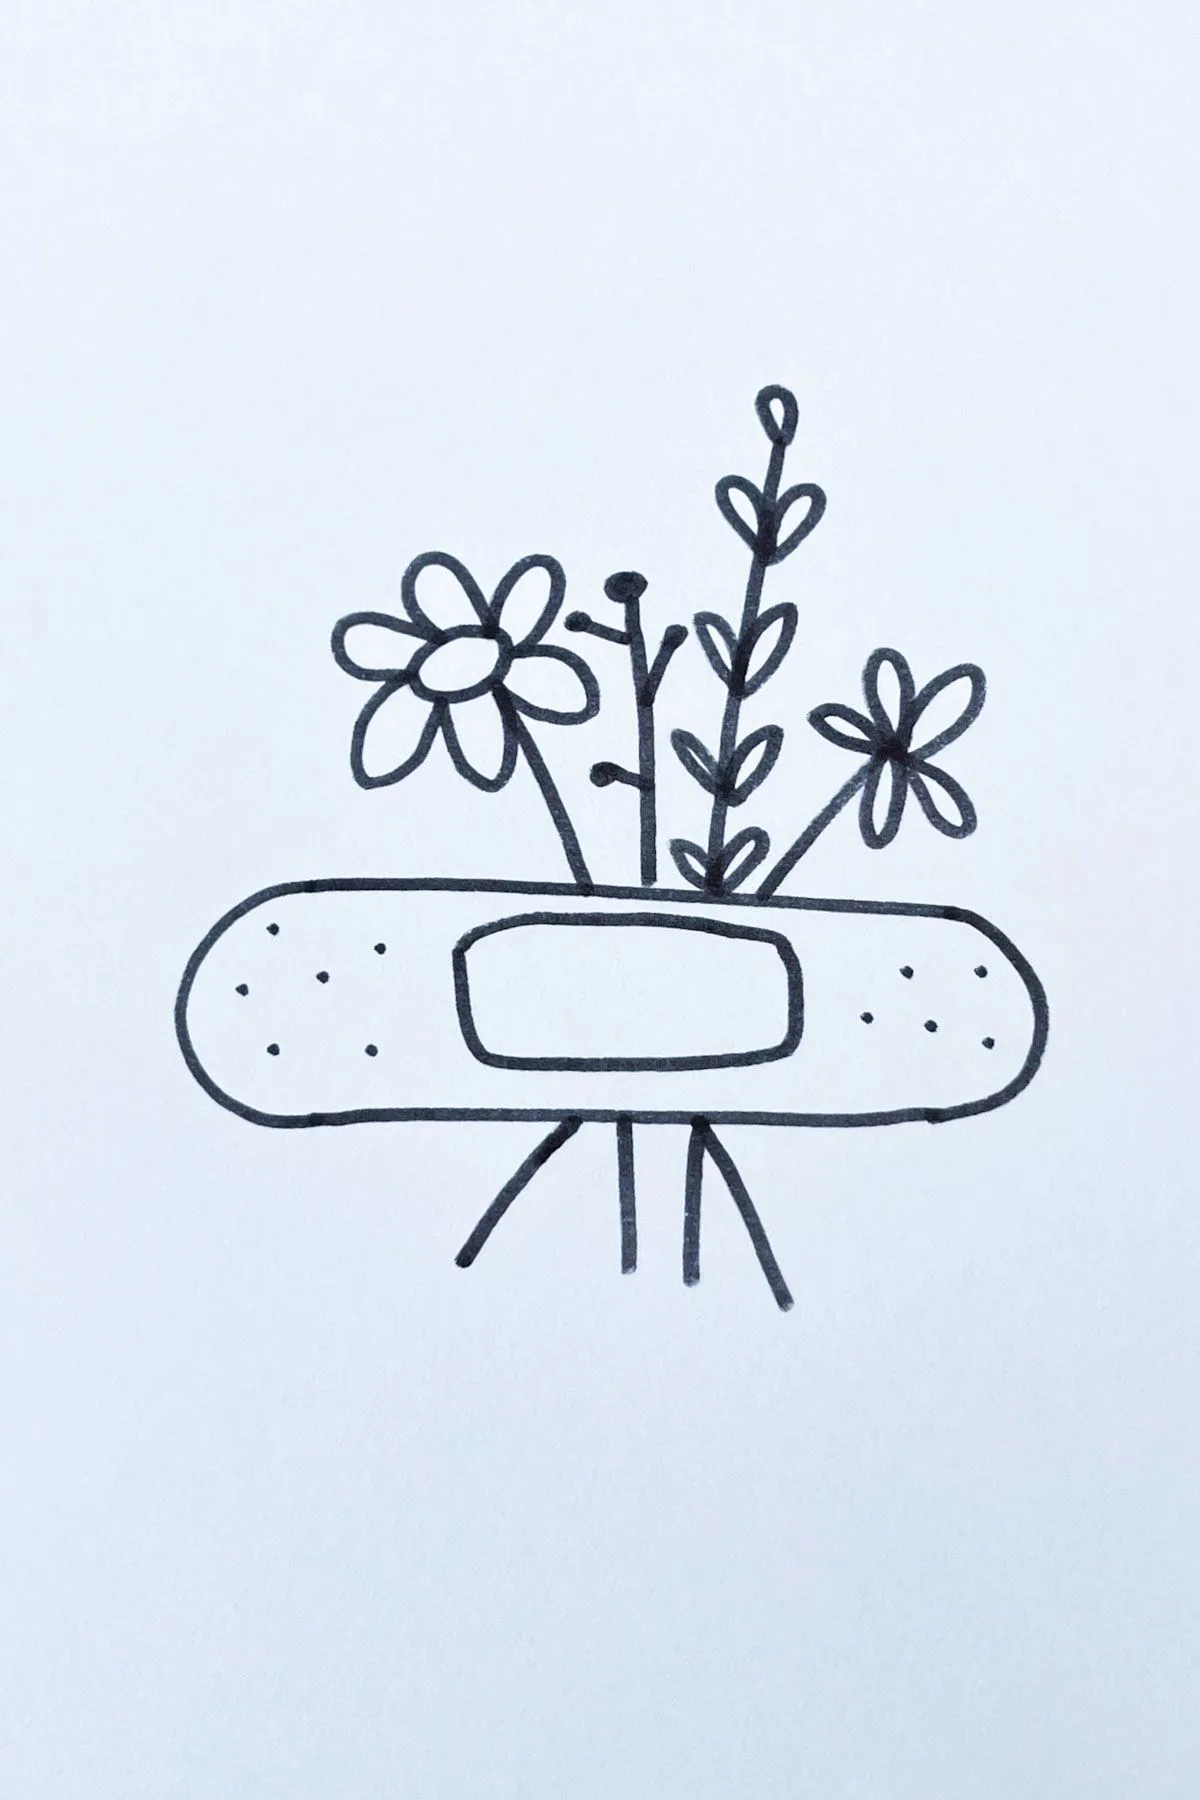 band aid bouquet drawing